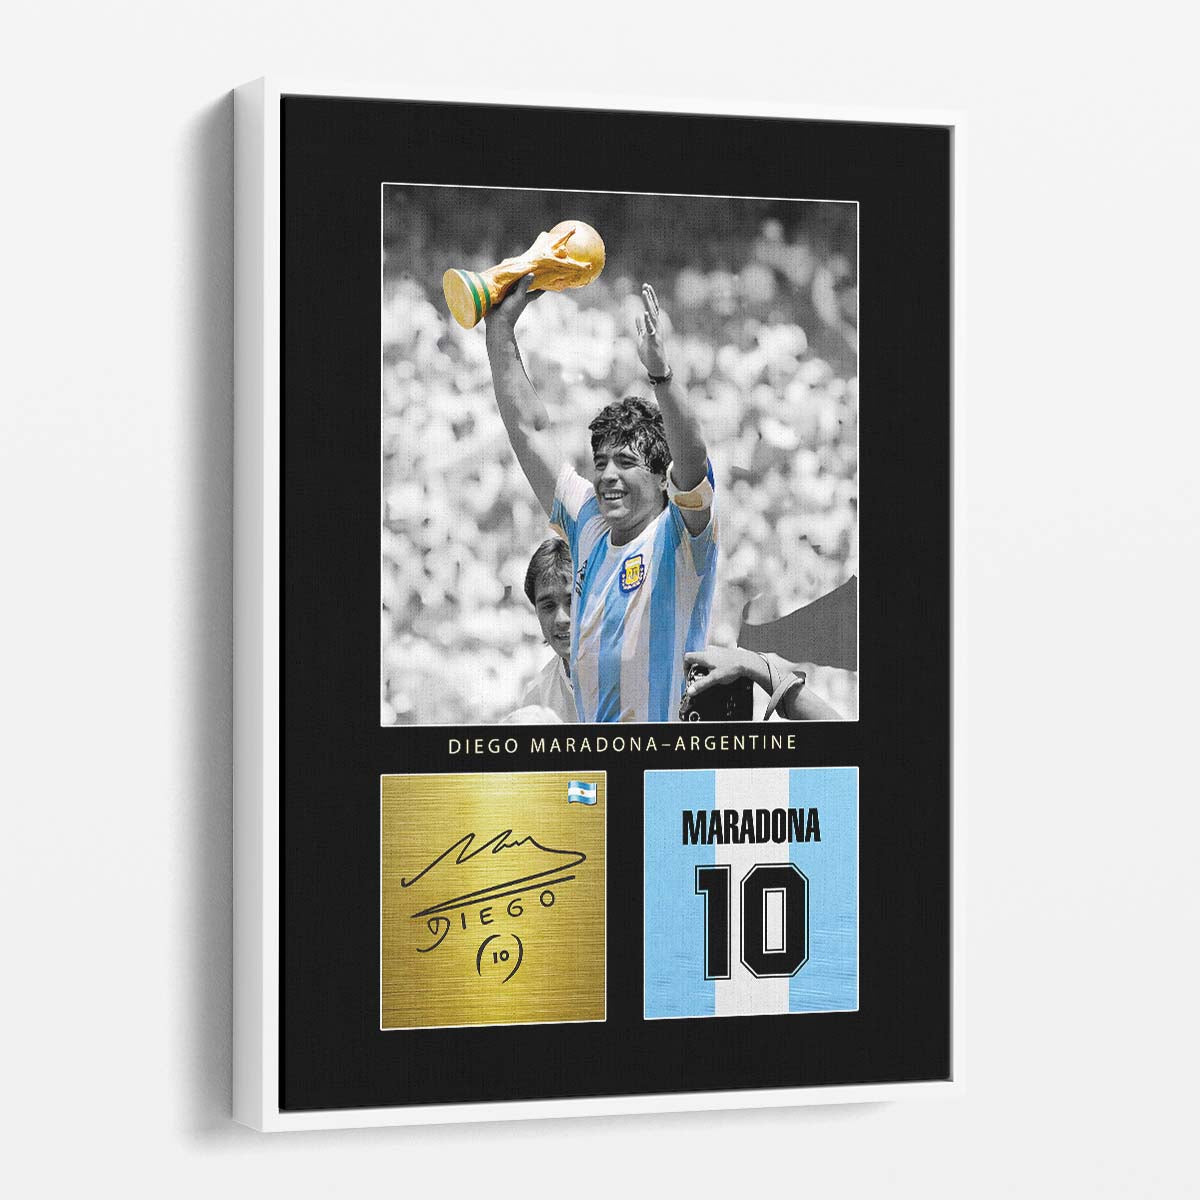 Diego Maradona Argentine Signature World Cup Wall Art by Luxuriance Designs. Made in USA.